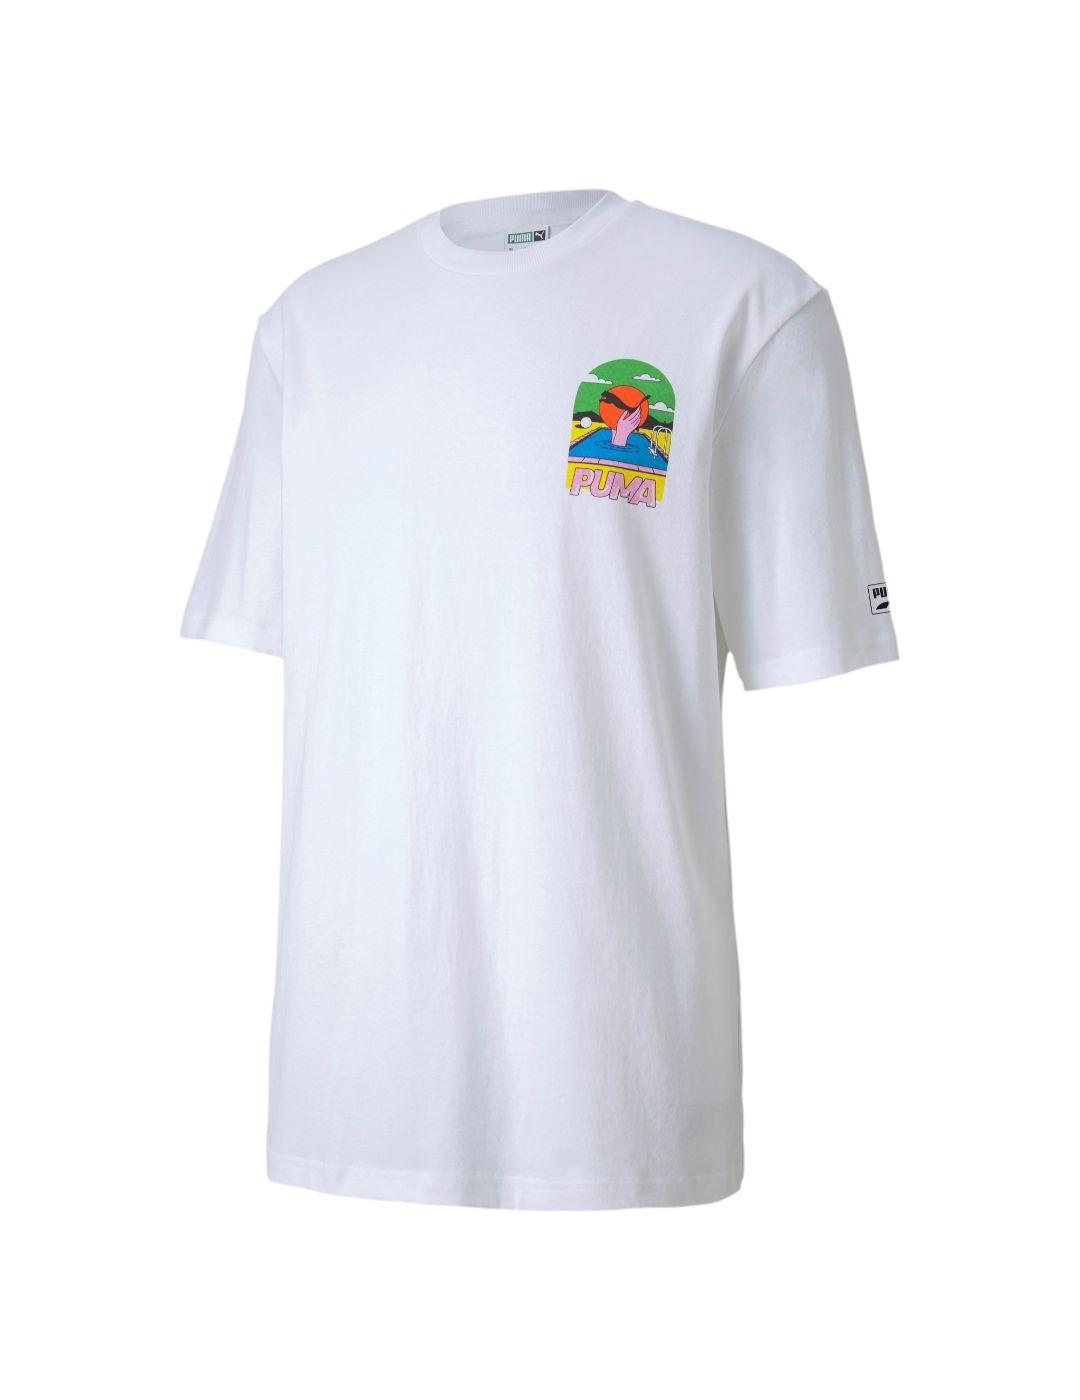 DOWNTOWN GRAPHIC TEE WHITE-X